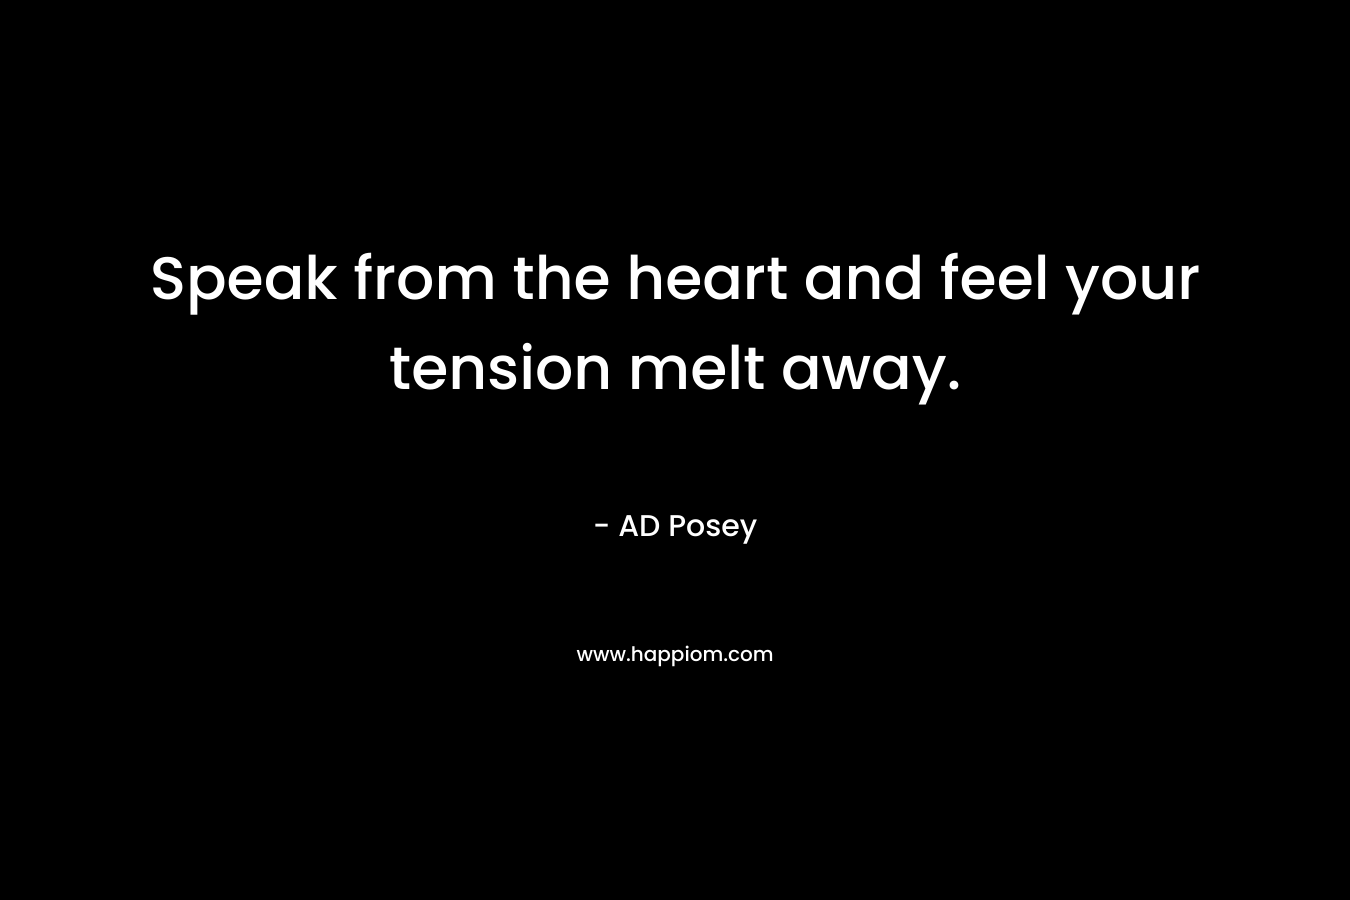 Speak from the heart and feel your tension melt away.